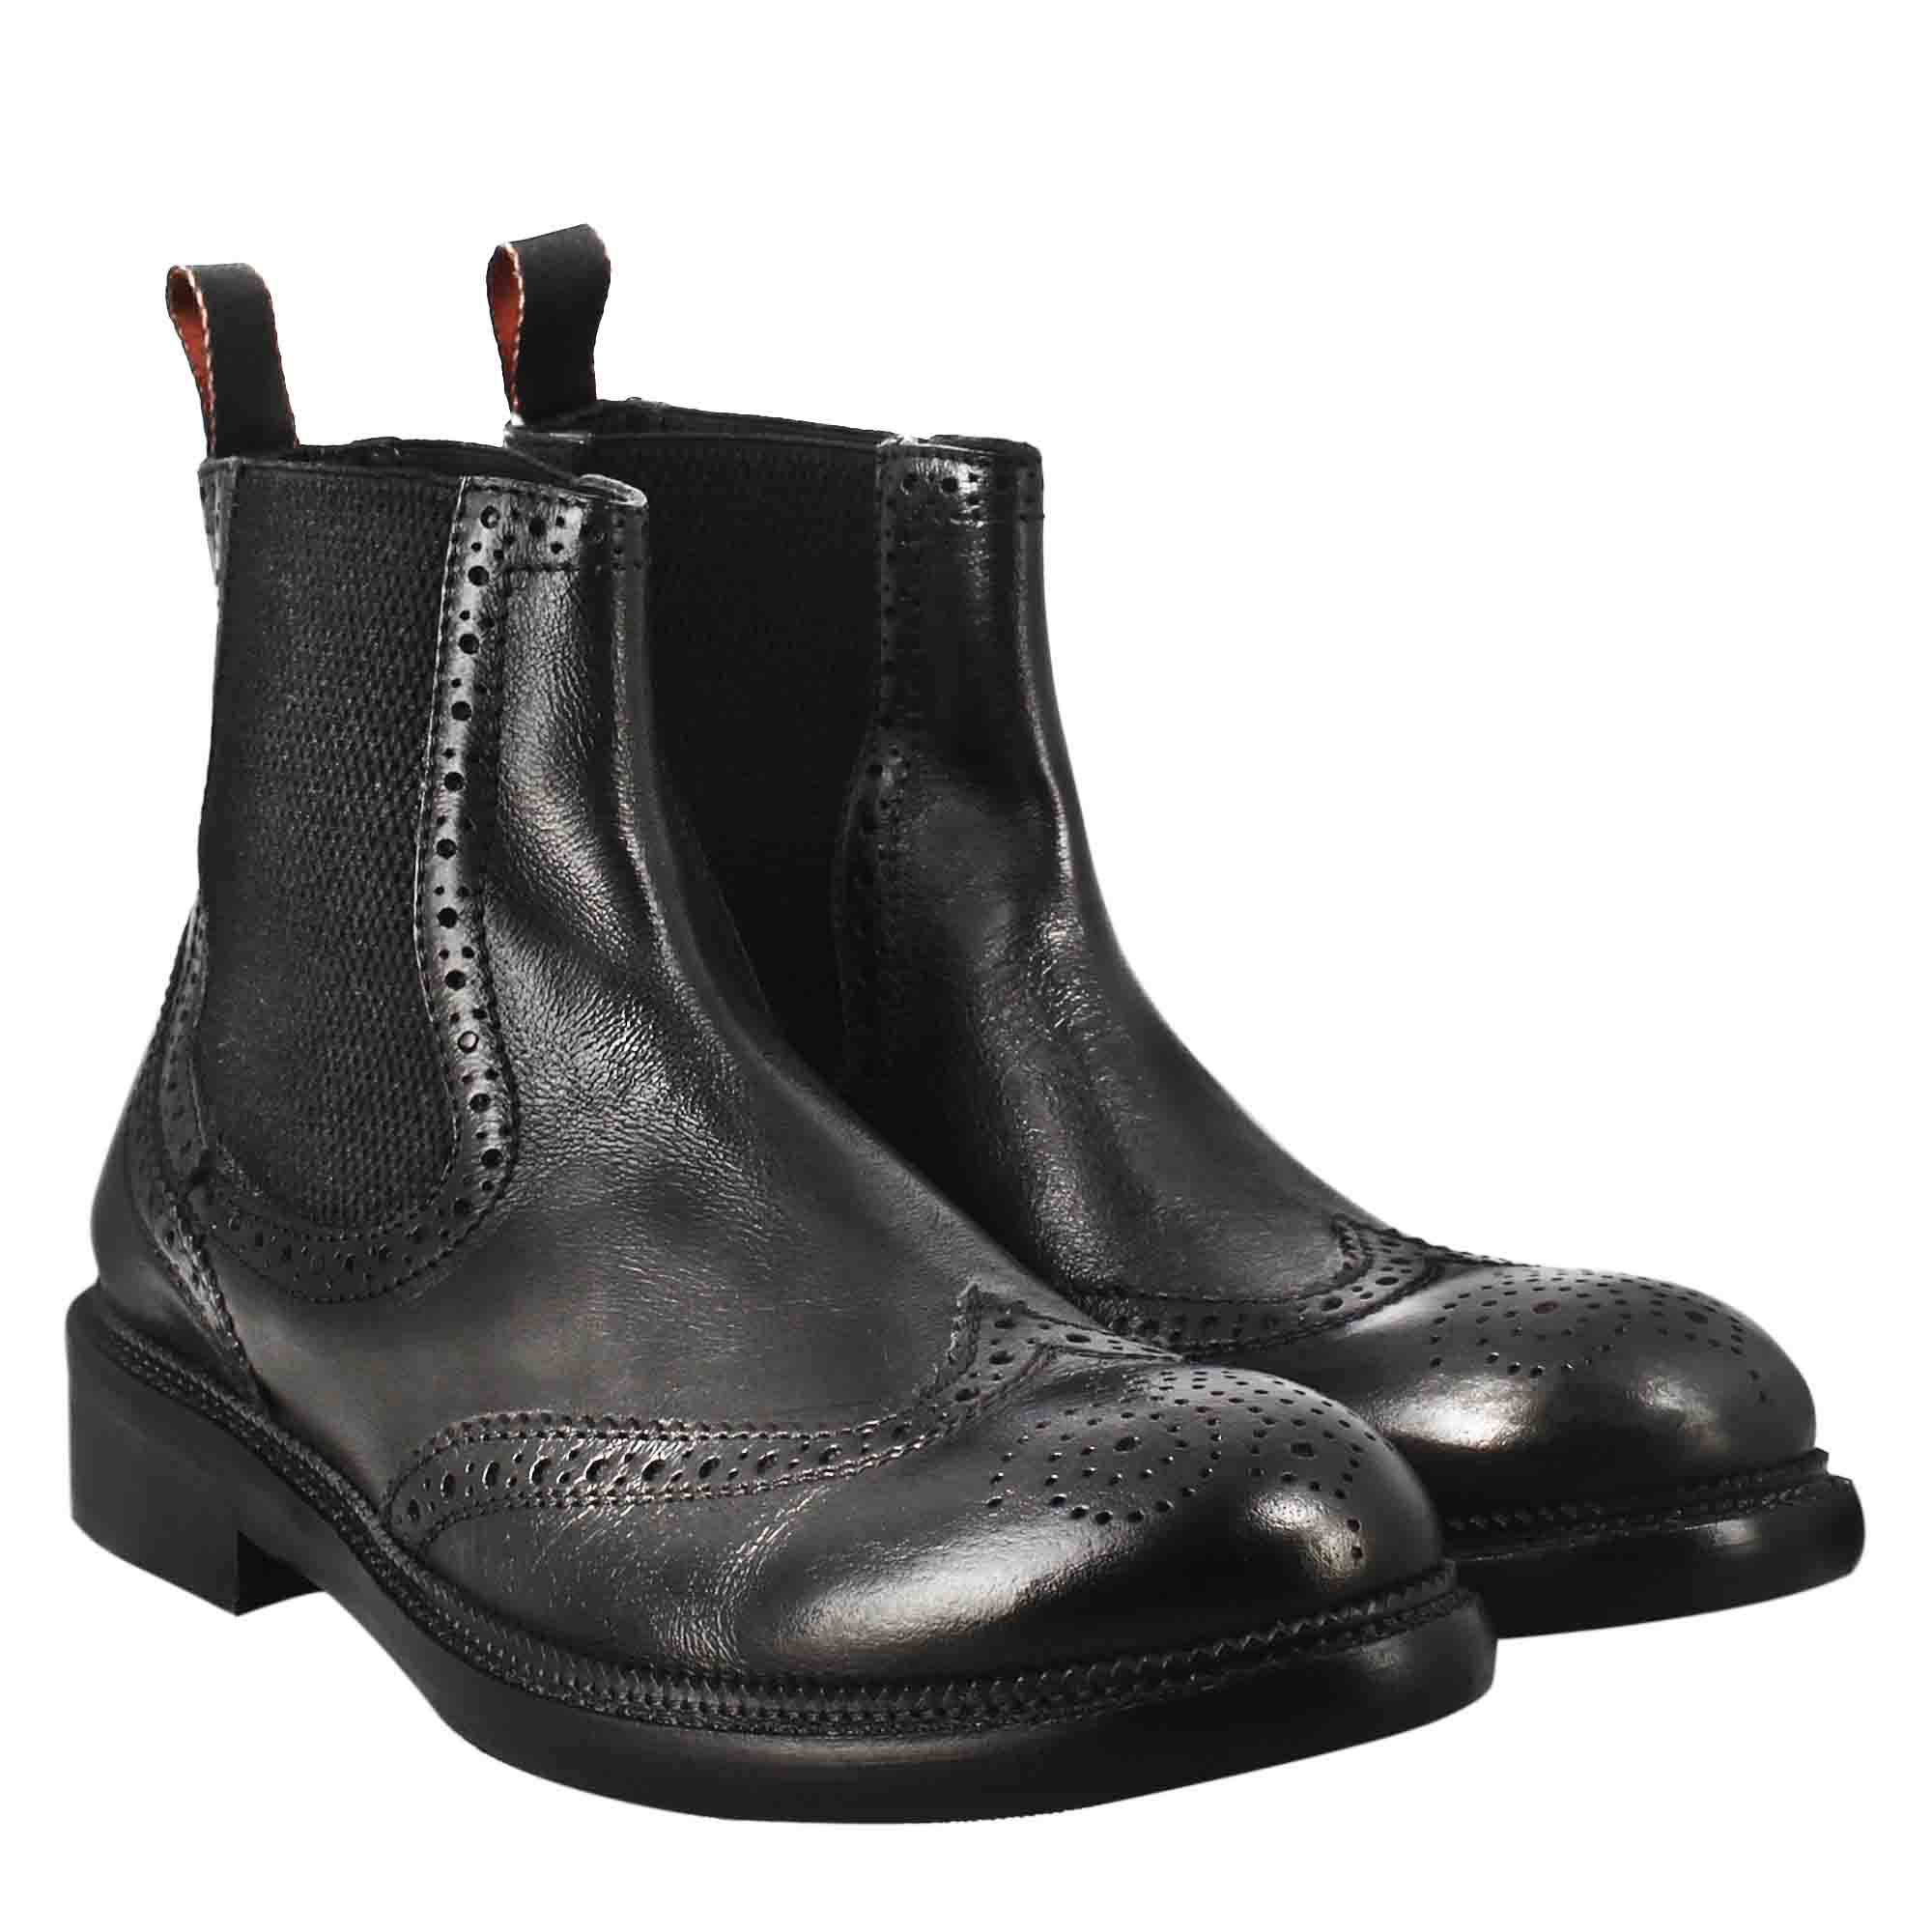 Men's candy chelsea boot in black washed leather